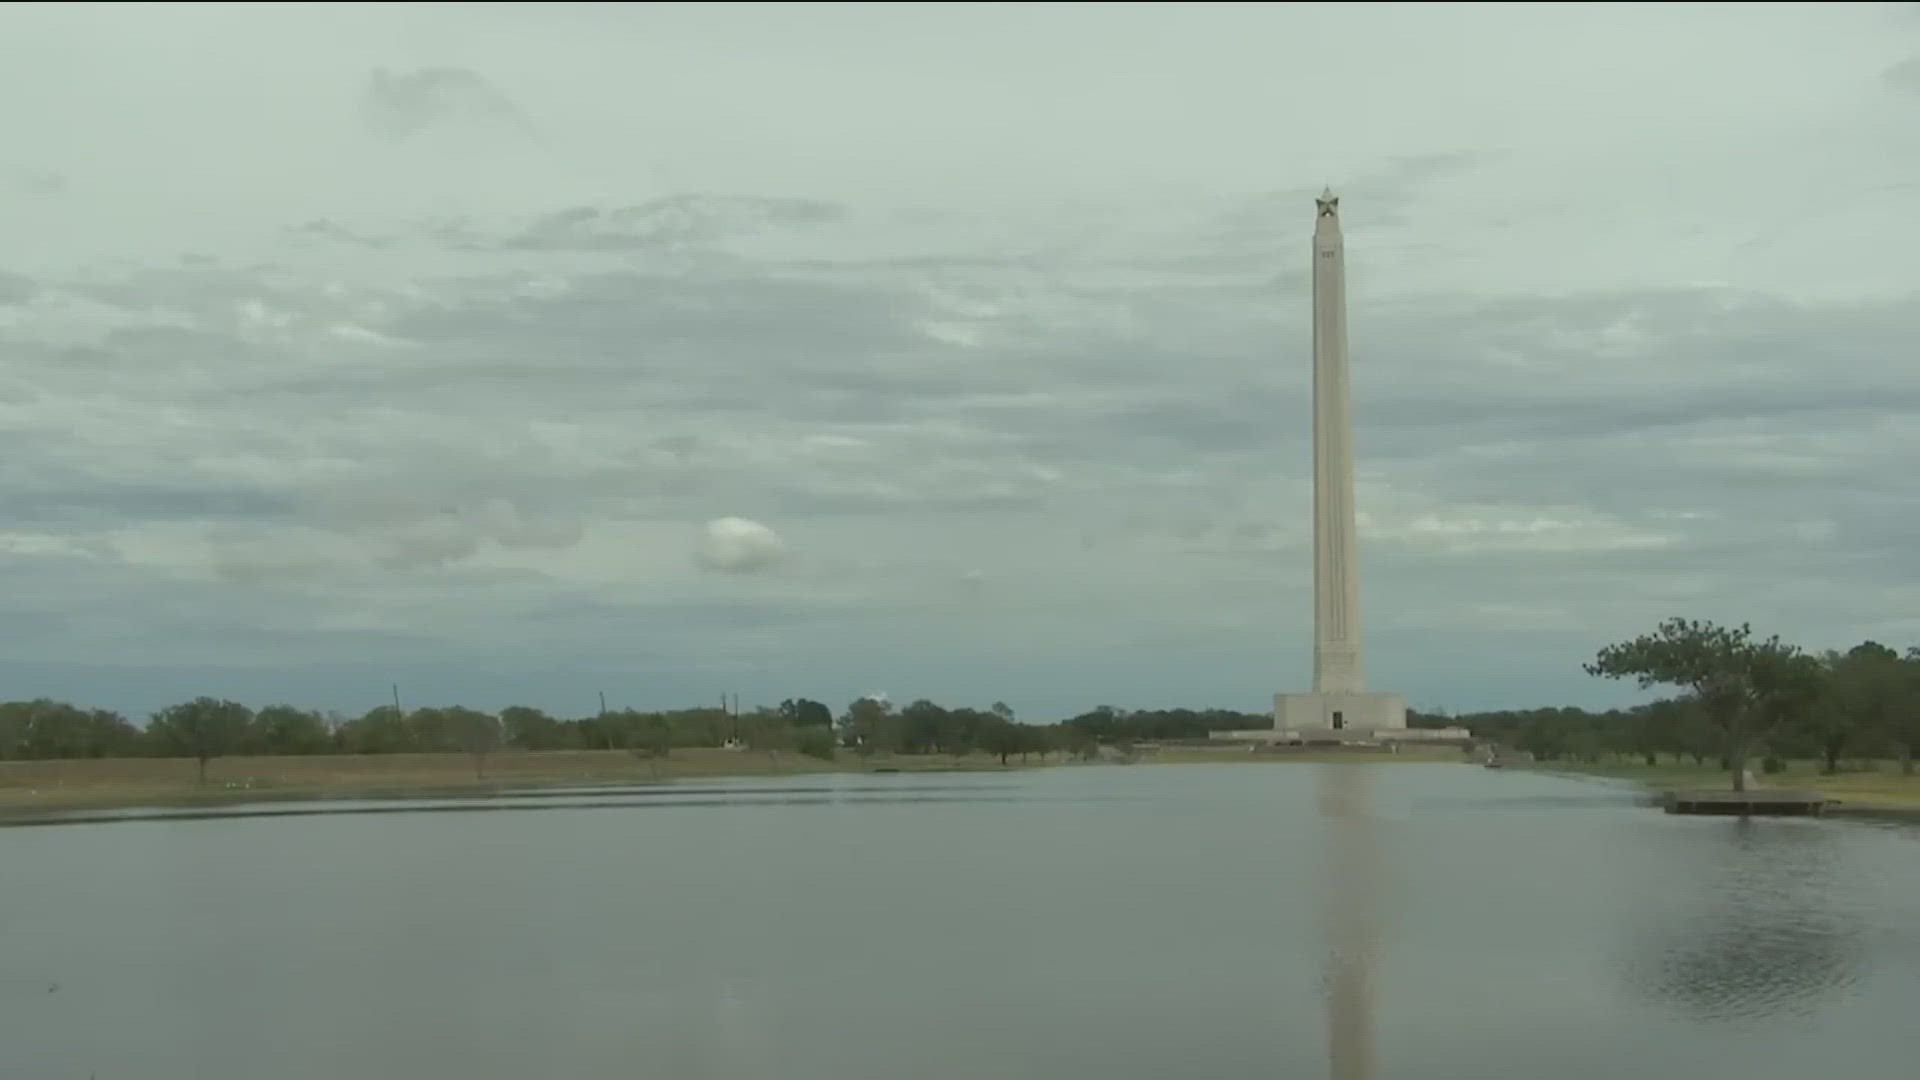 This week marks the 85th anniversary of the dedication of the San Jacinto Monument. It's a marvel of design and construction that stands tall today.